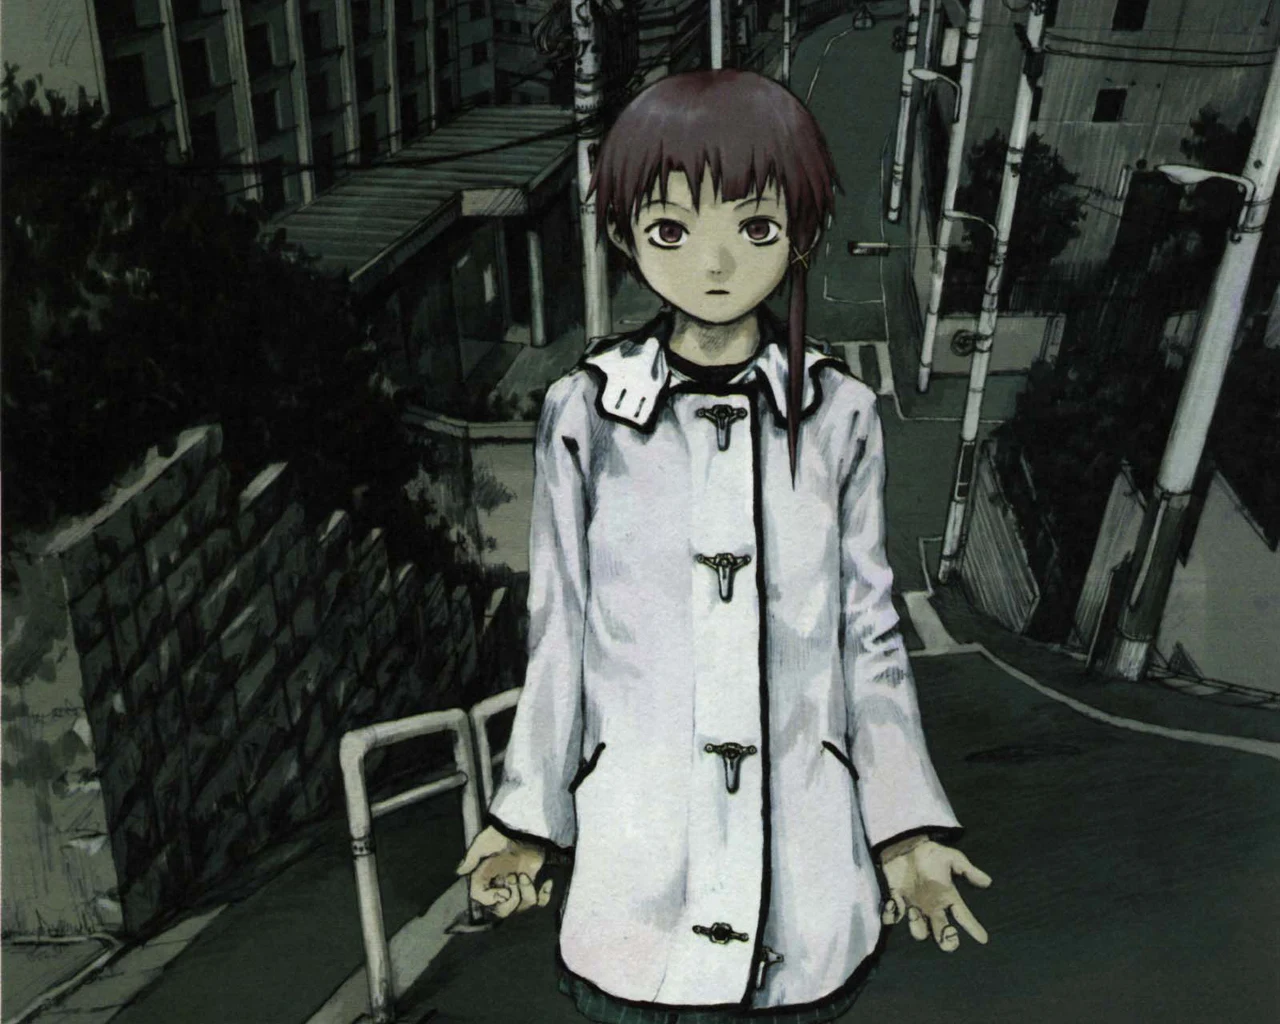 Top Serial Experiments Lain Pic